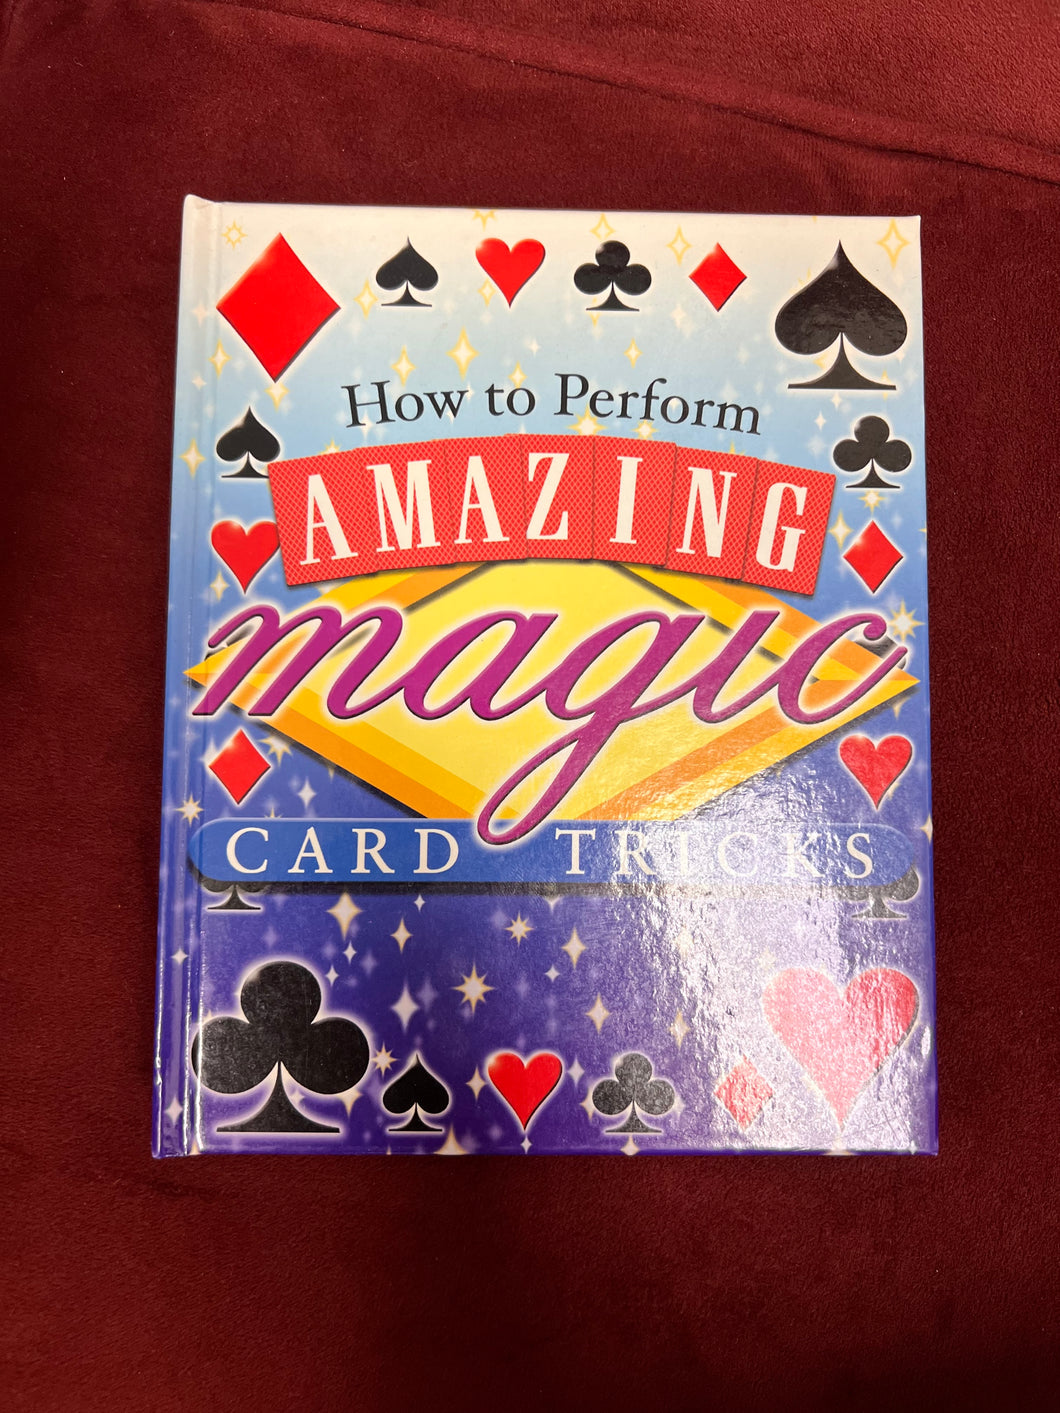 How to Perform Amazing Card Tricks